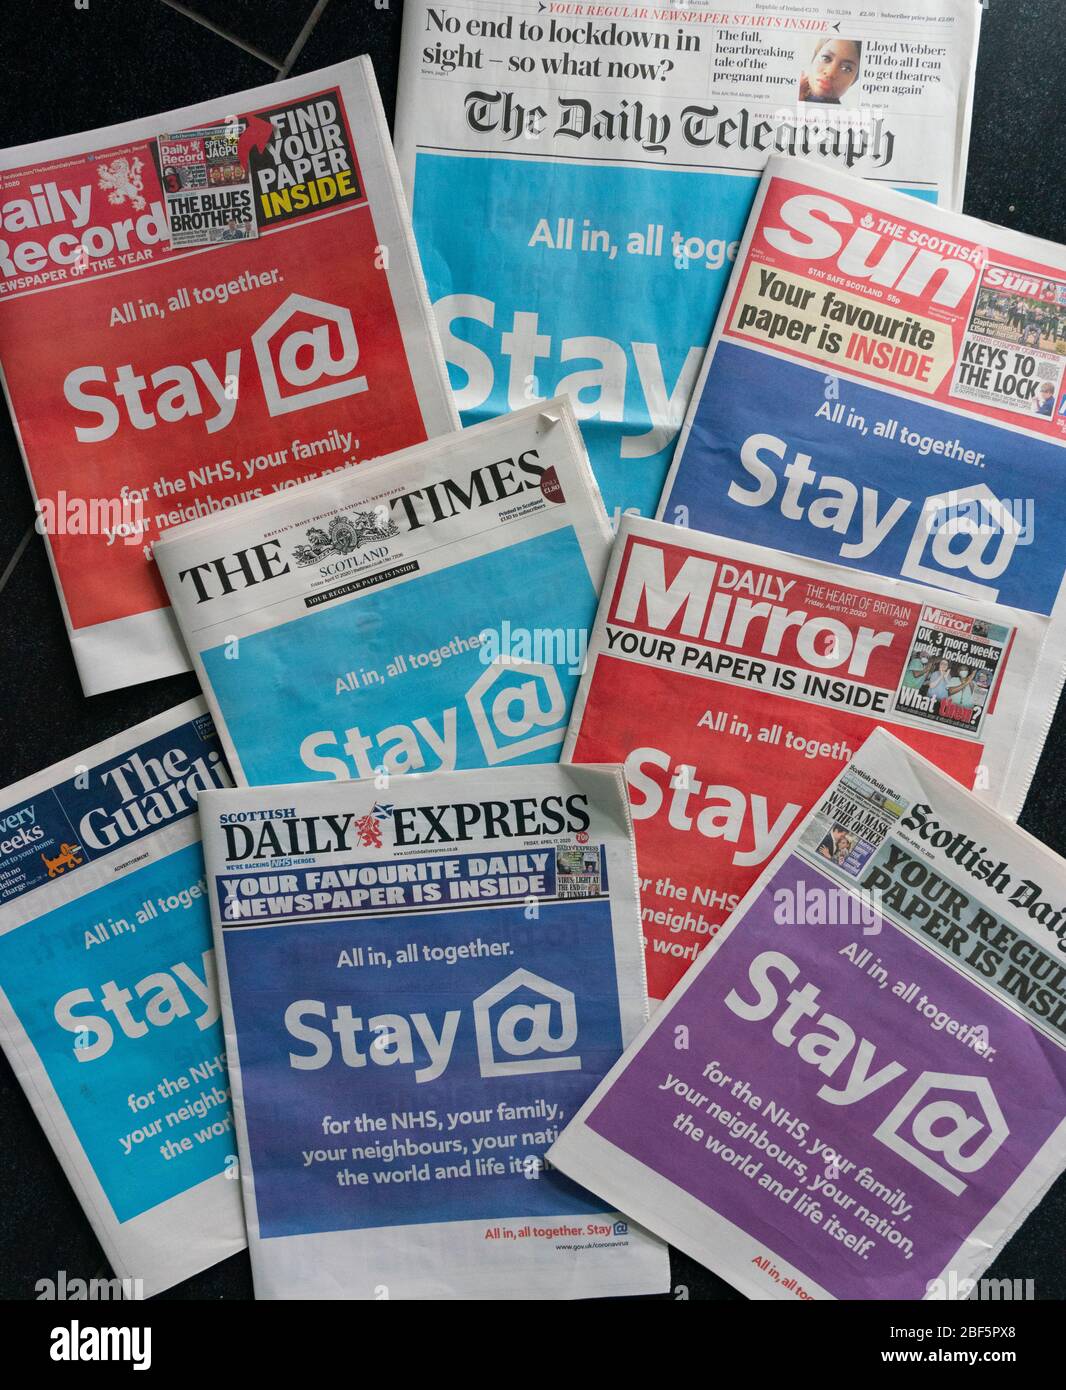 Edinburgh, Scotland, UK. 17 April 2020. Front covers of all UK newspapers carry government headline warning to stay at home during the coronavirus lockdown. Iain Masterton/Alamy Live News Stock Photo